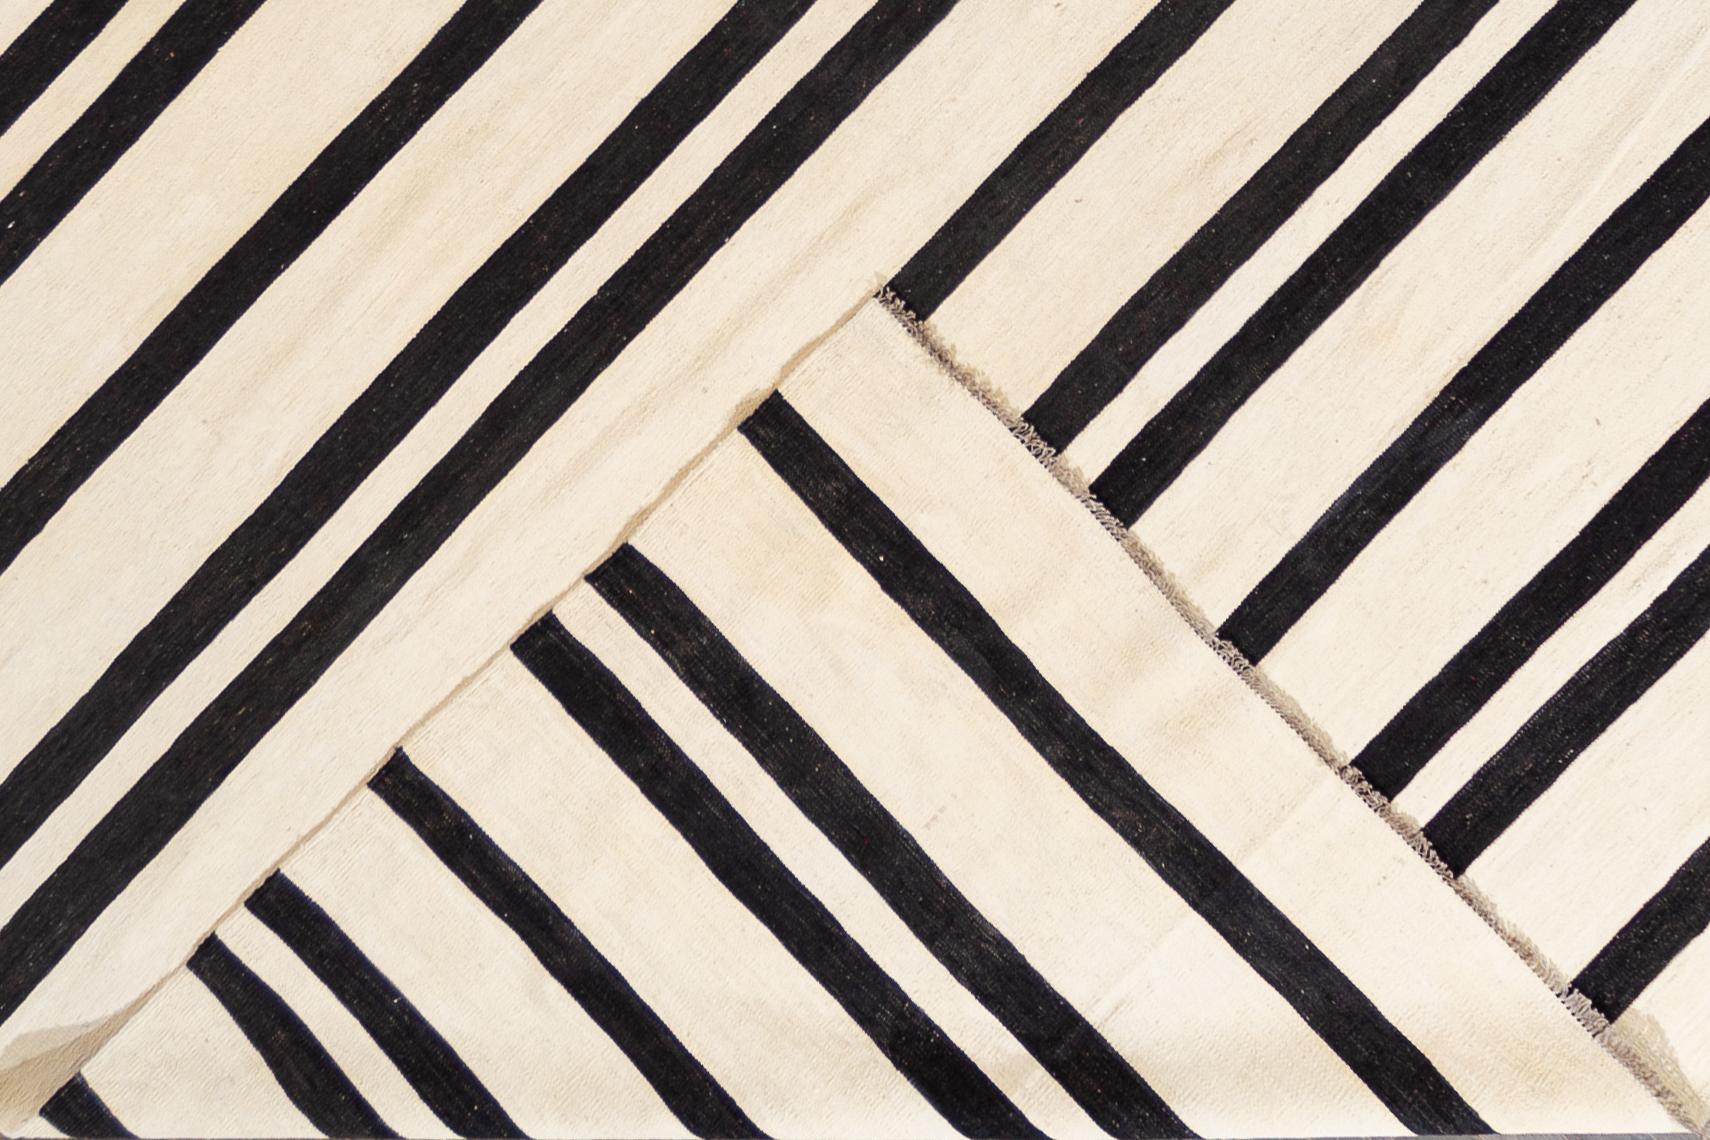 Beautiful 21st century contemporary Kilim Rug, handwoven wool in an all-over black and white striped design.

This rug measures 12' 0